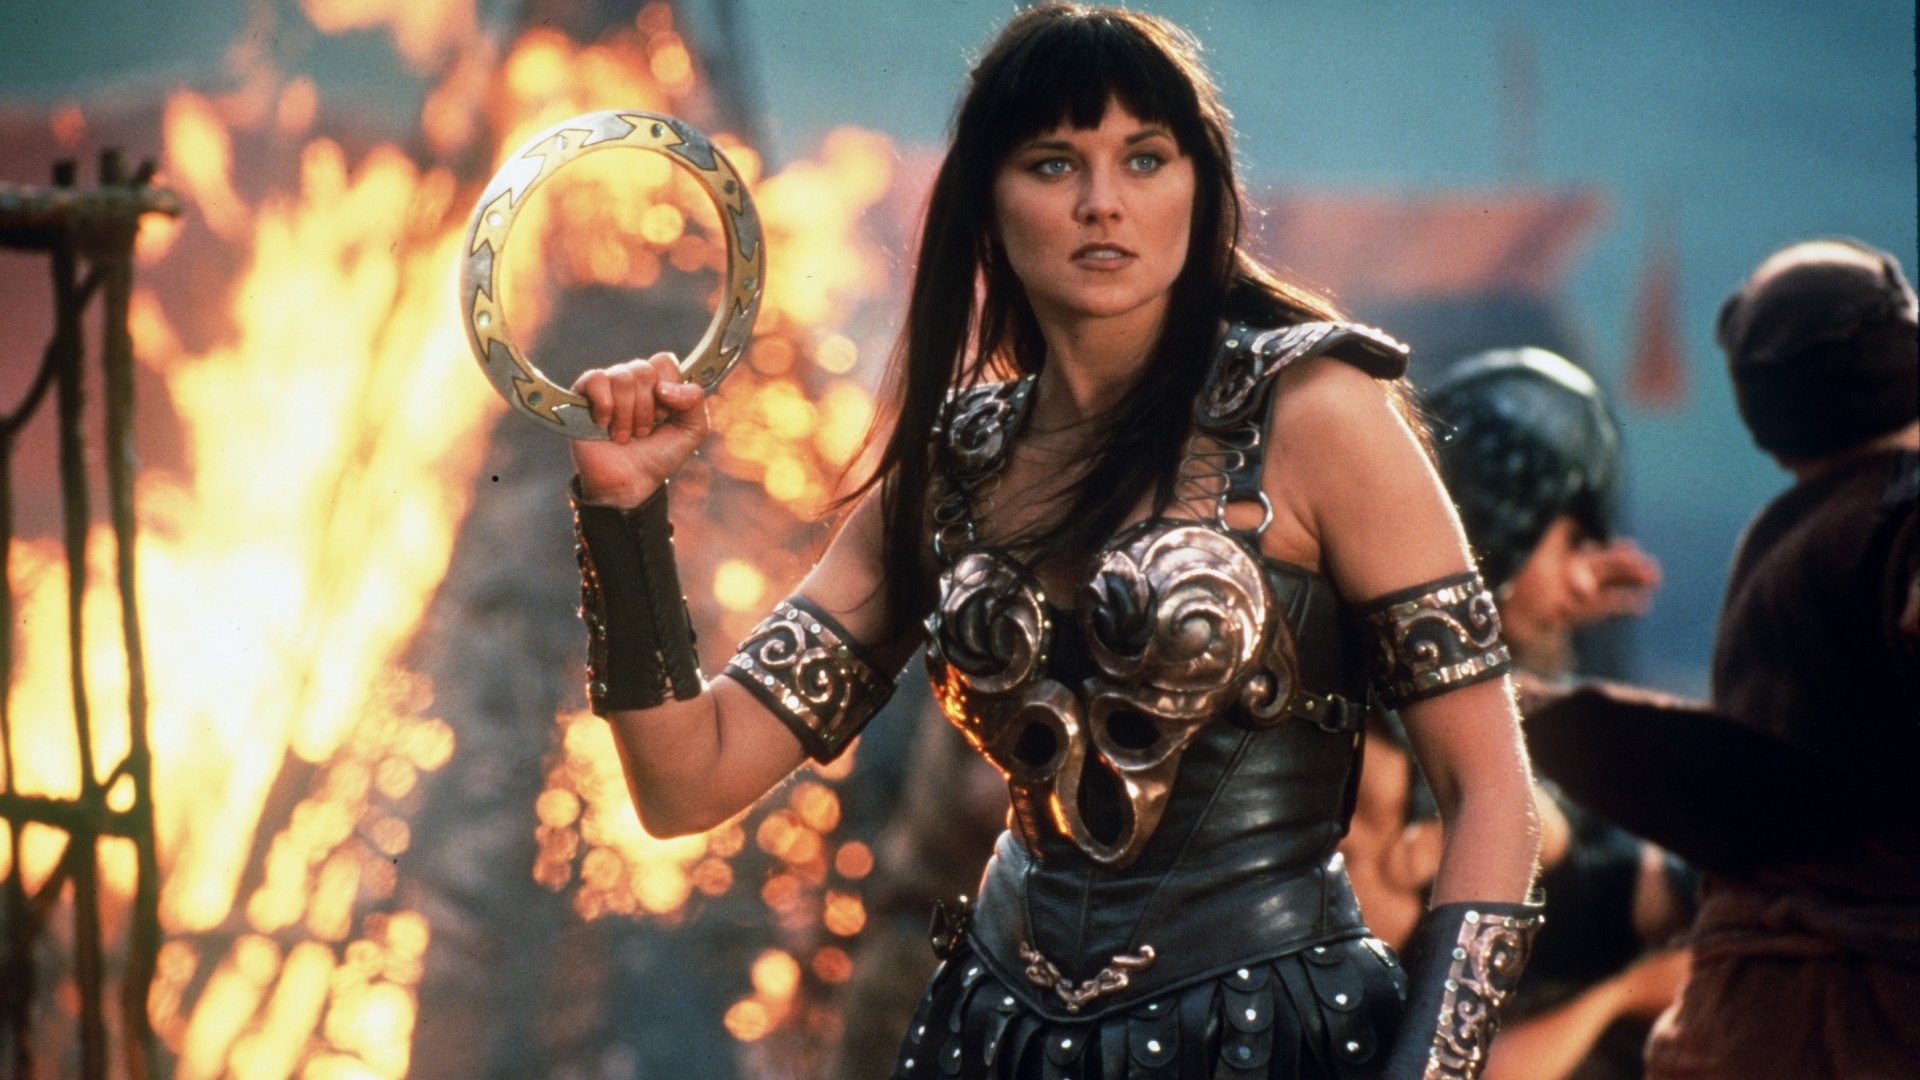 People 1920x1080 Xena girl in armor Lucy Lawless women actress TV series